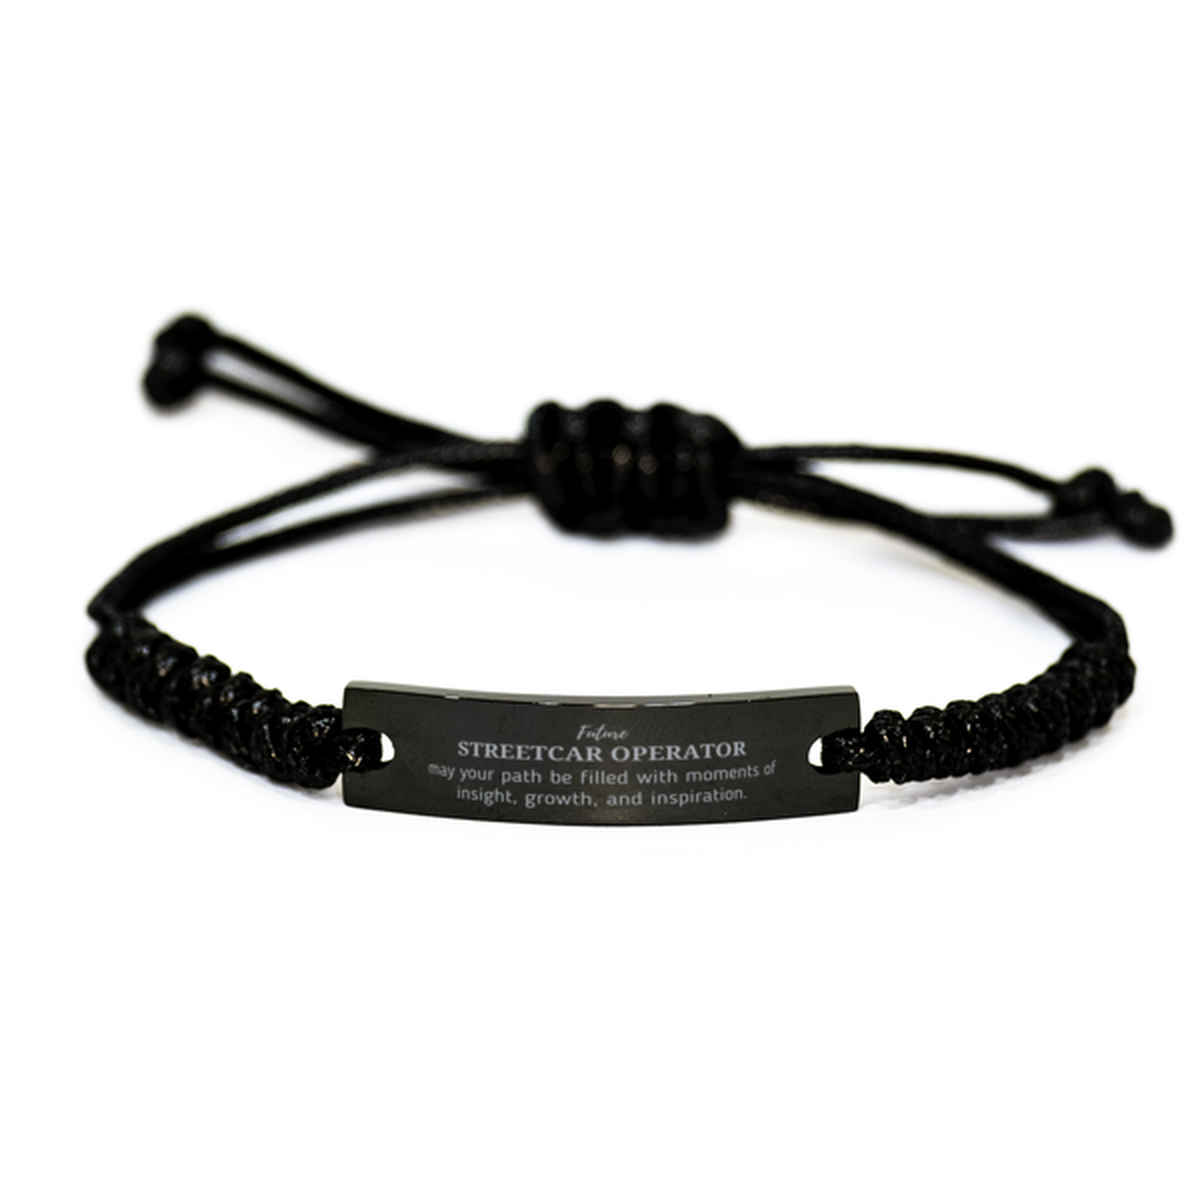 Future Streetcar Operator Gifts, May your path be filled with moments of insight, Graduation Gifts for New Streetcar Operator, Christmas Unique Black Rope Bracelet For Men, Women, Friends